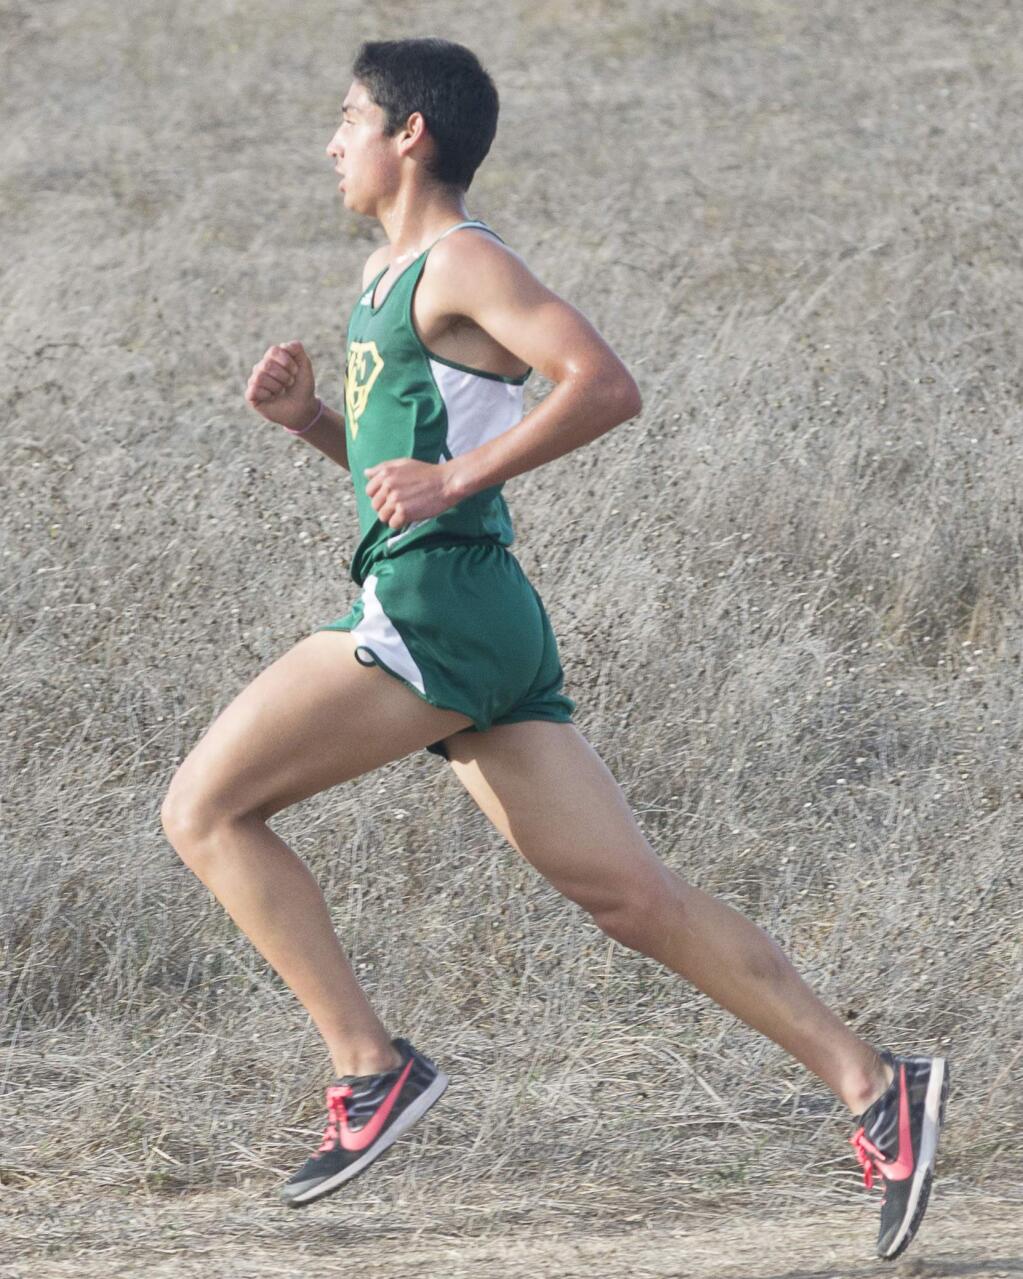 RICH LANGDON/FOR THE ARGUS-COURIERMatt Salazar led Casa Grande to its first boys North Coast Section cross country championship, finishing second in the Division 2 run.